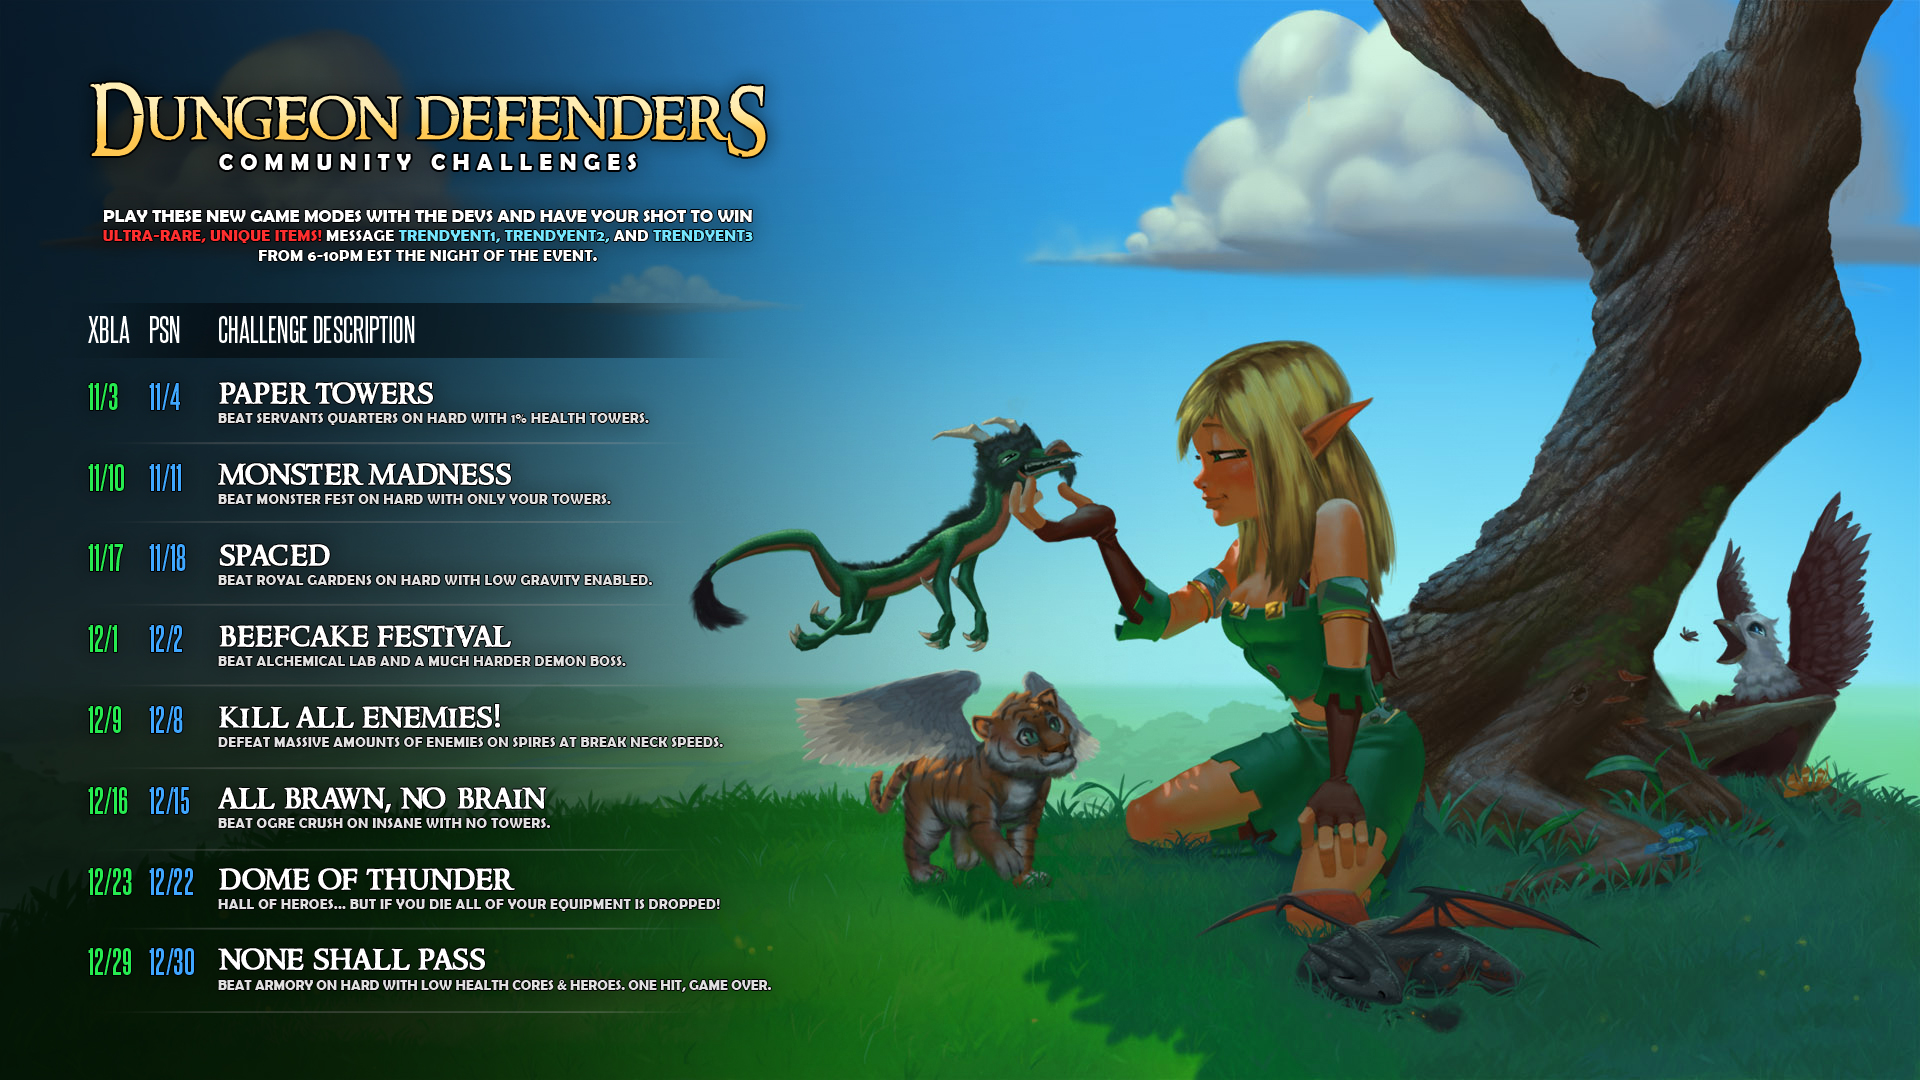 Dungeon Defenders celebrates 250K sales with community events